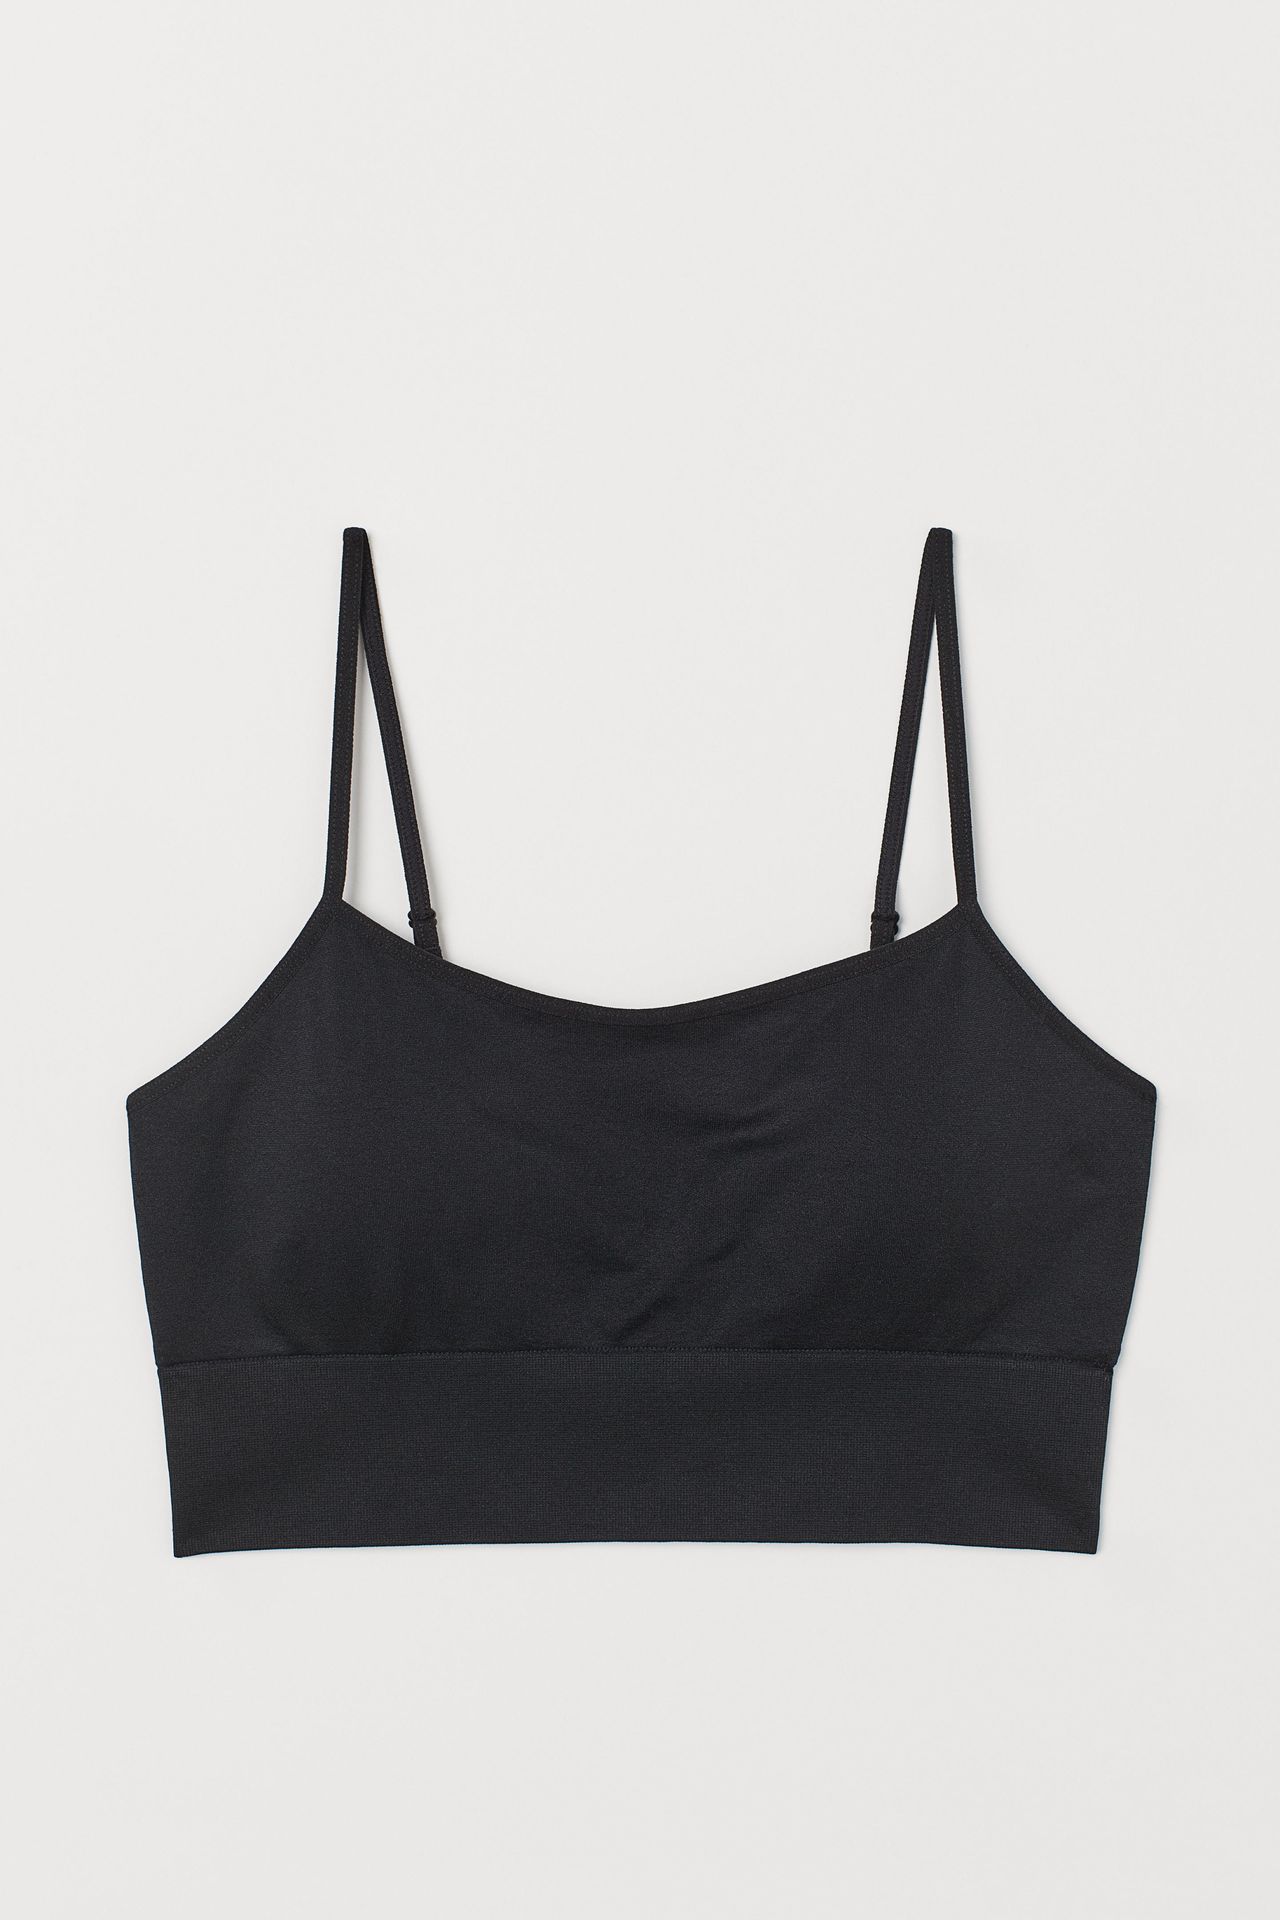 The Controversial Bra Top Trend That Keeps Selling Out | Who What Wear